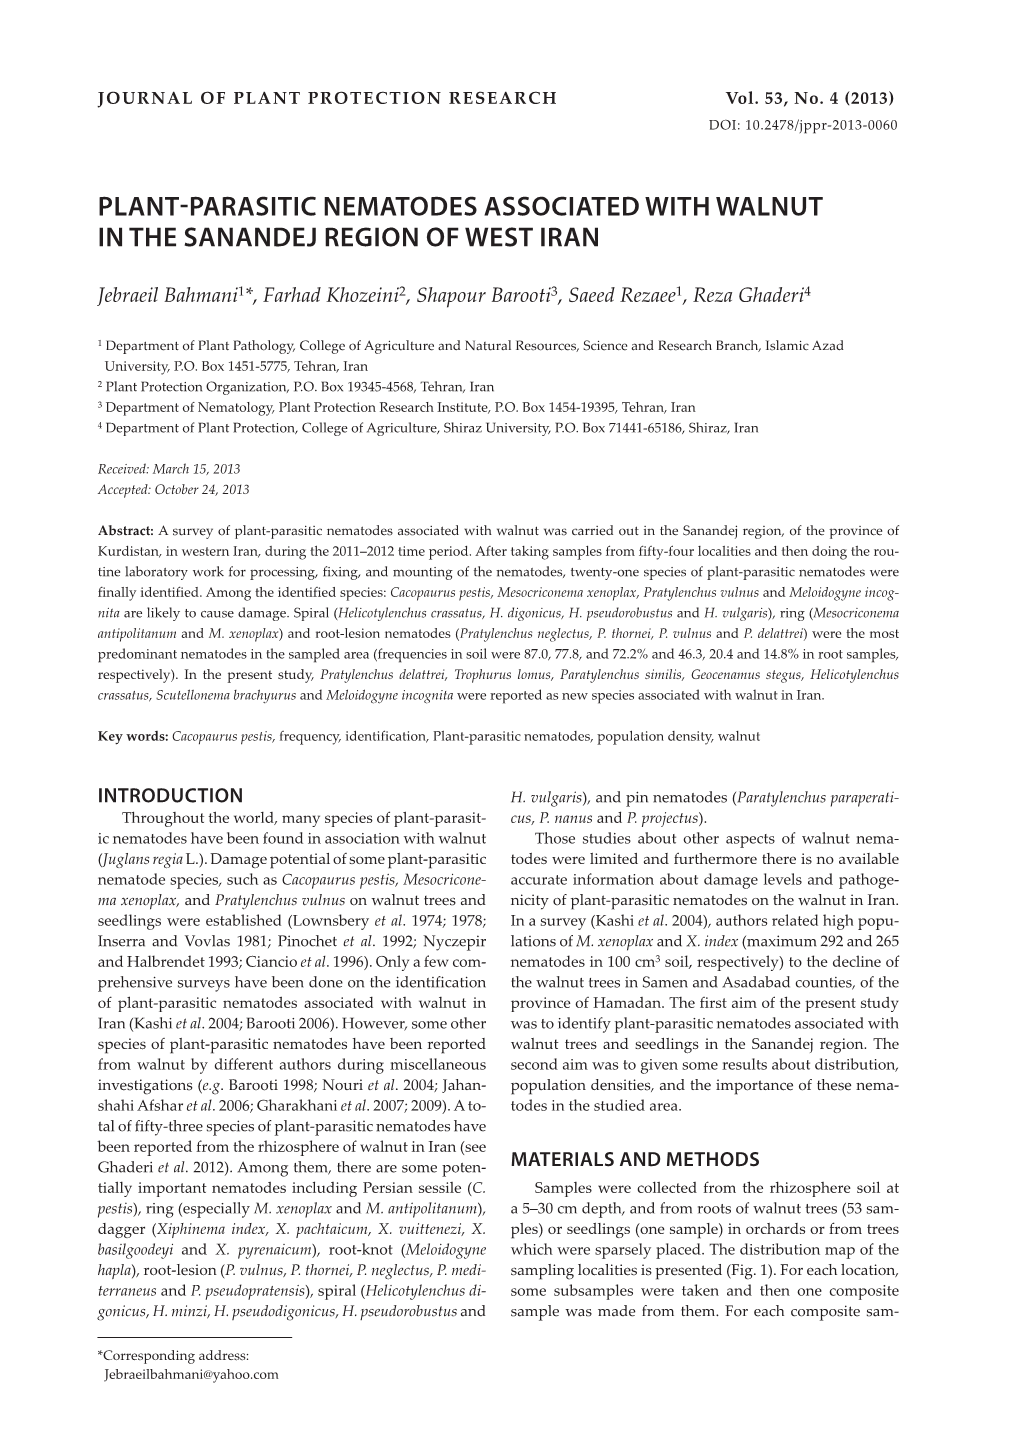 Plant-Parasitic Nematodes Associated with Walnut in the Sanandej Region of West Iran